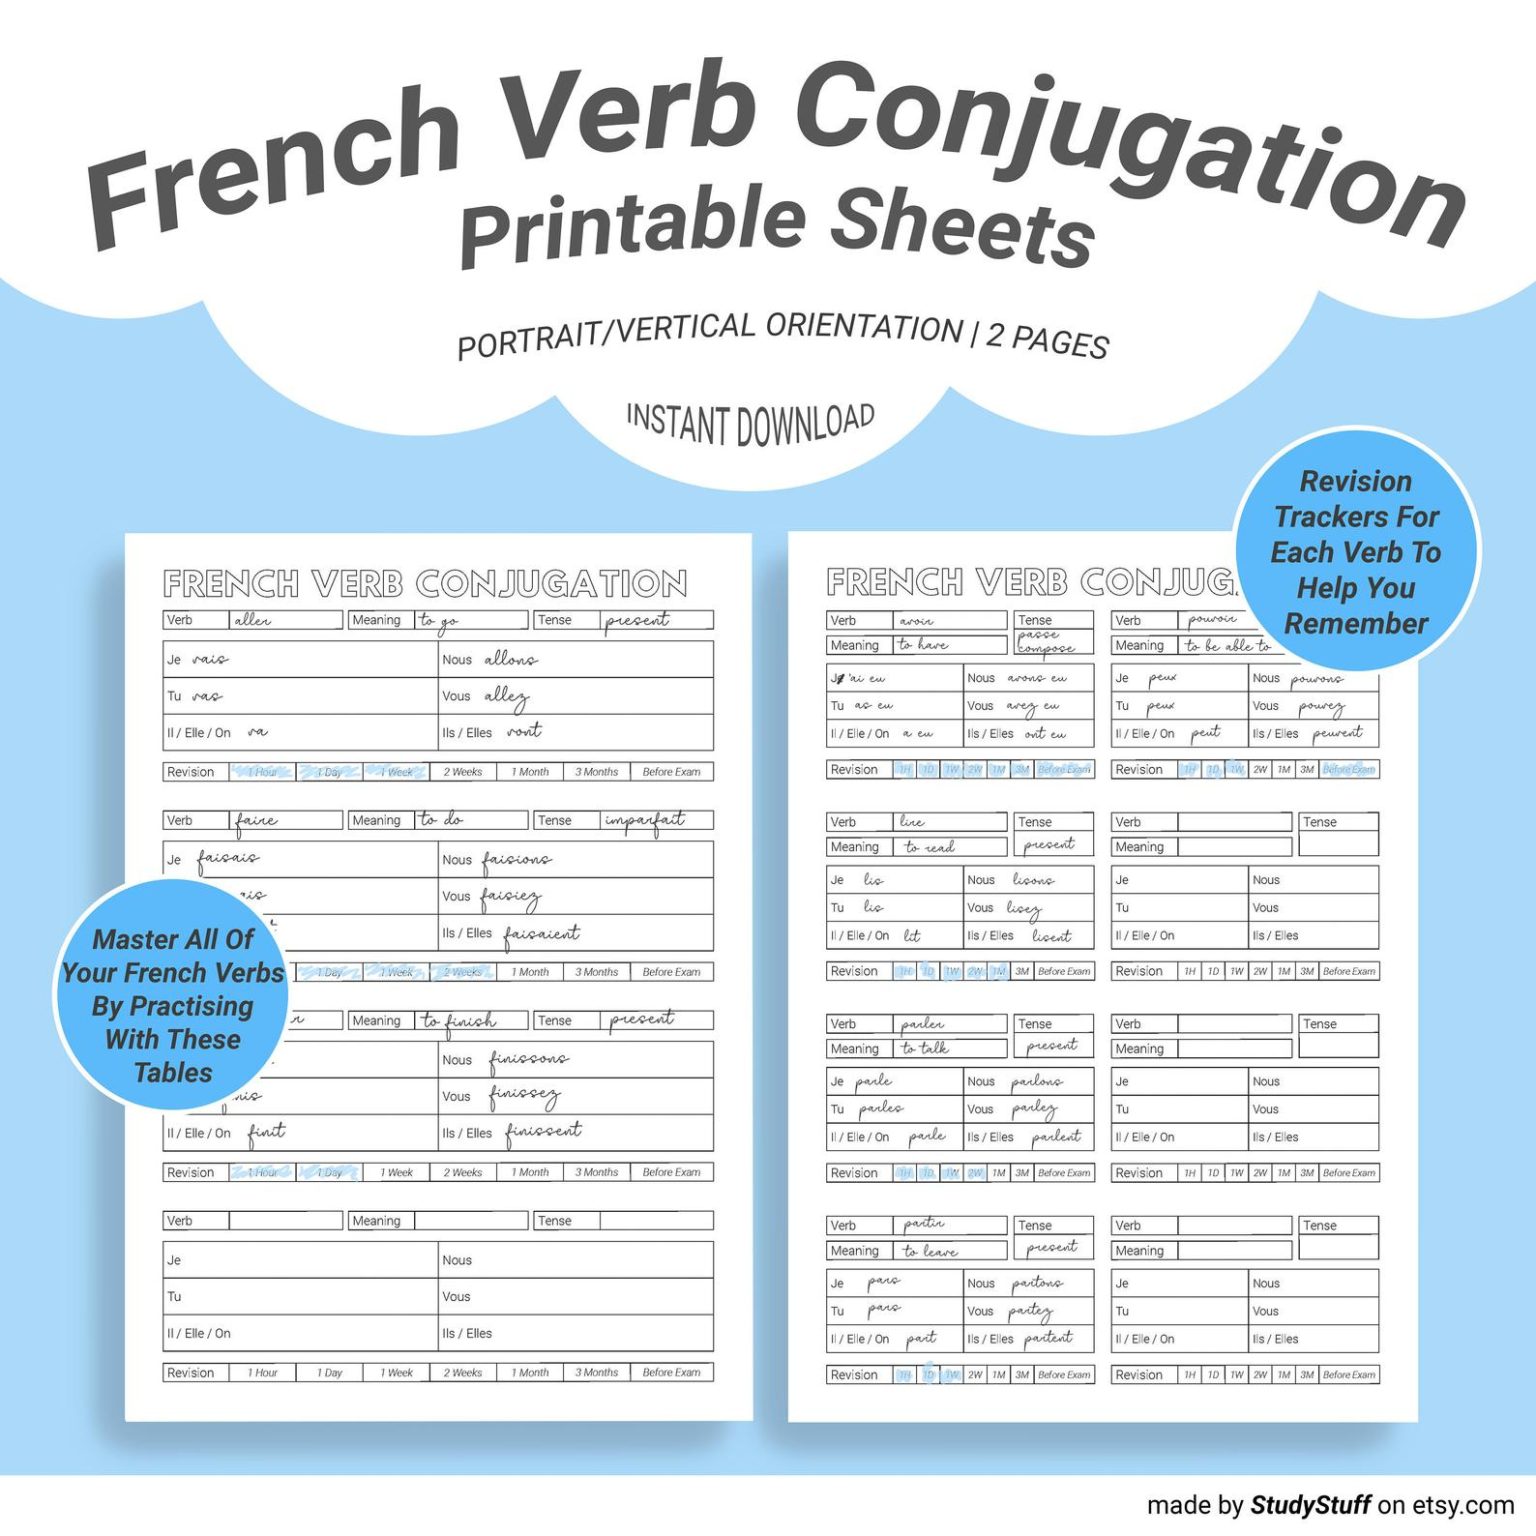 Use This Conjugation Worksheet To Master Your French Verbs Study Stuff